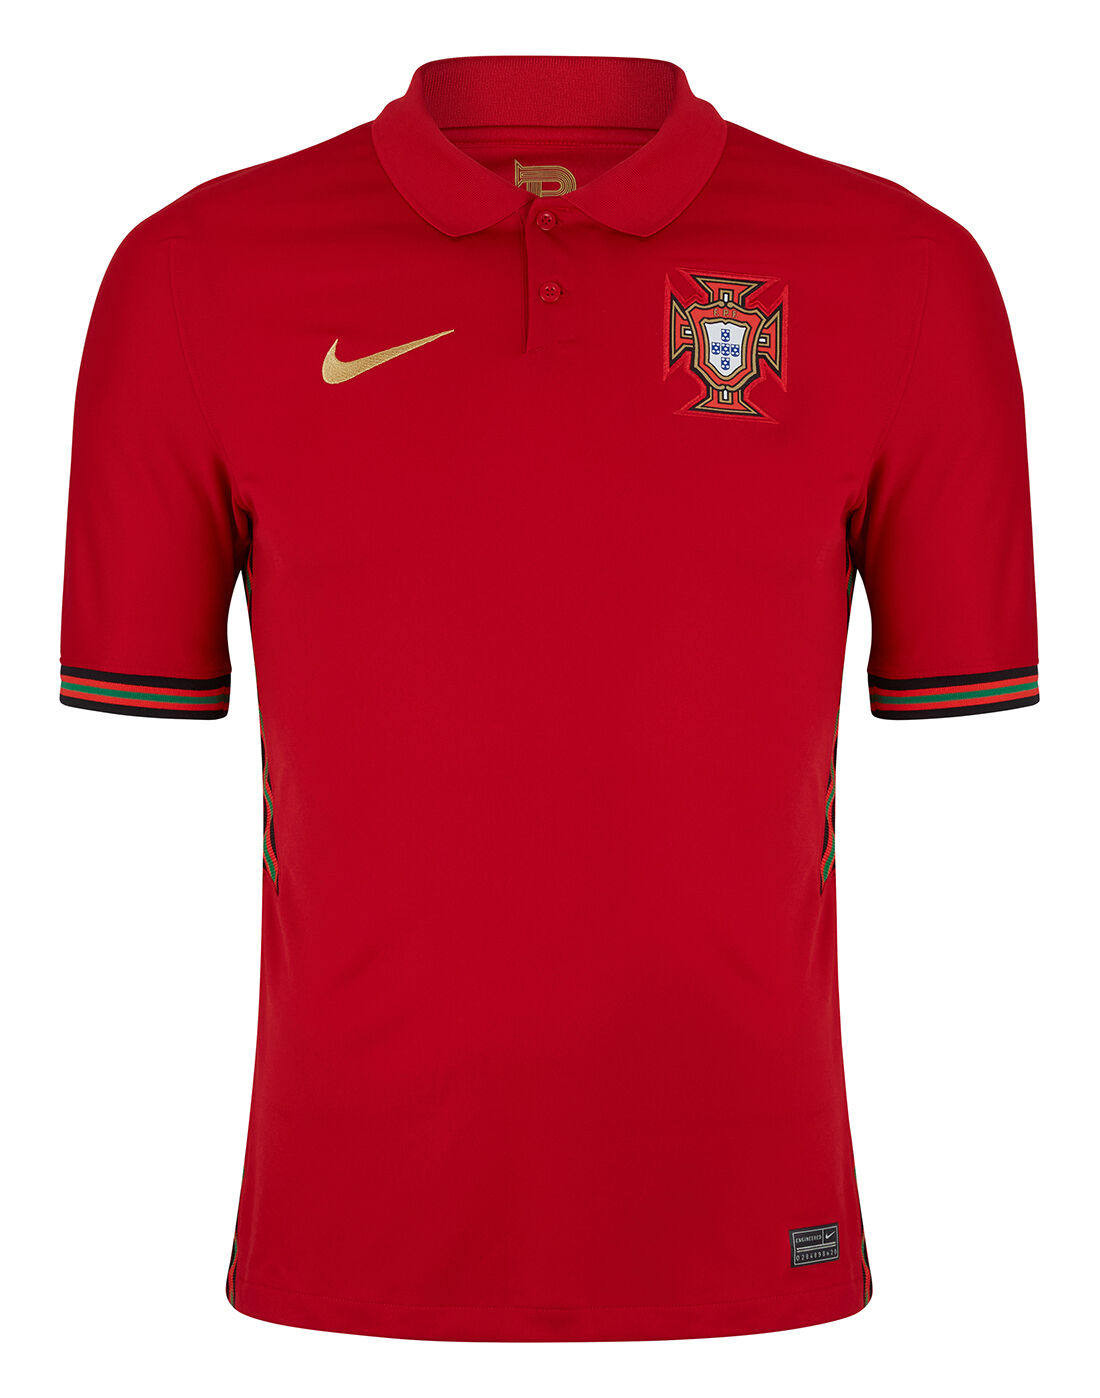 portugal jersey